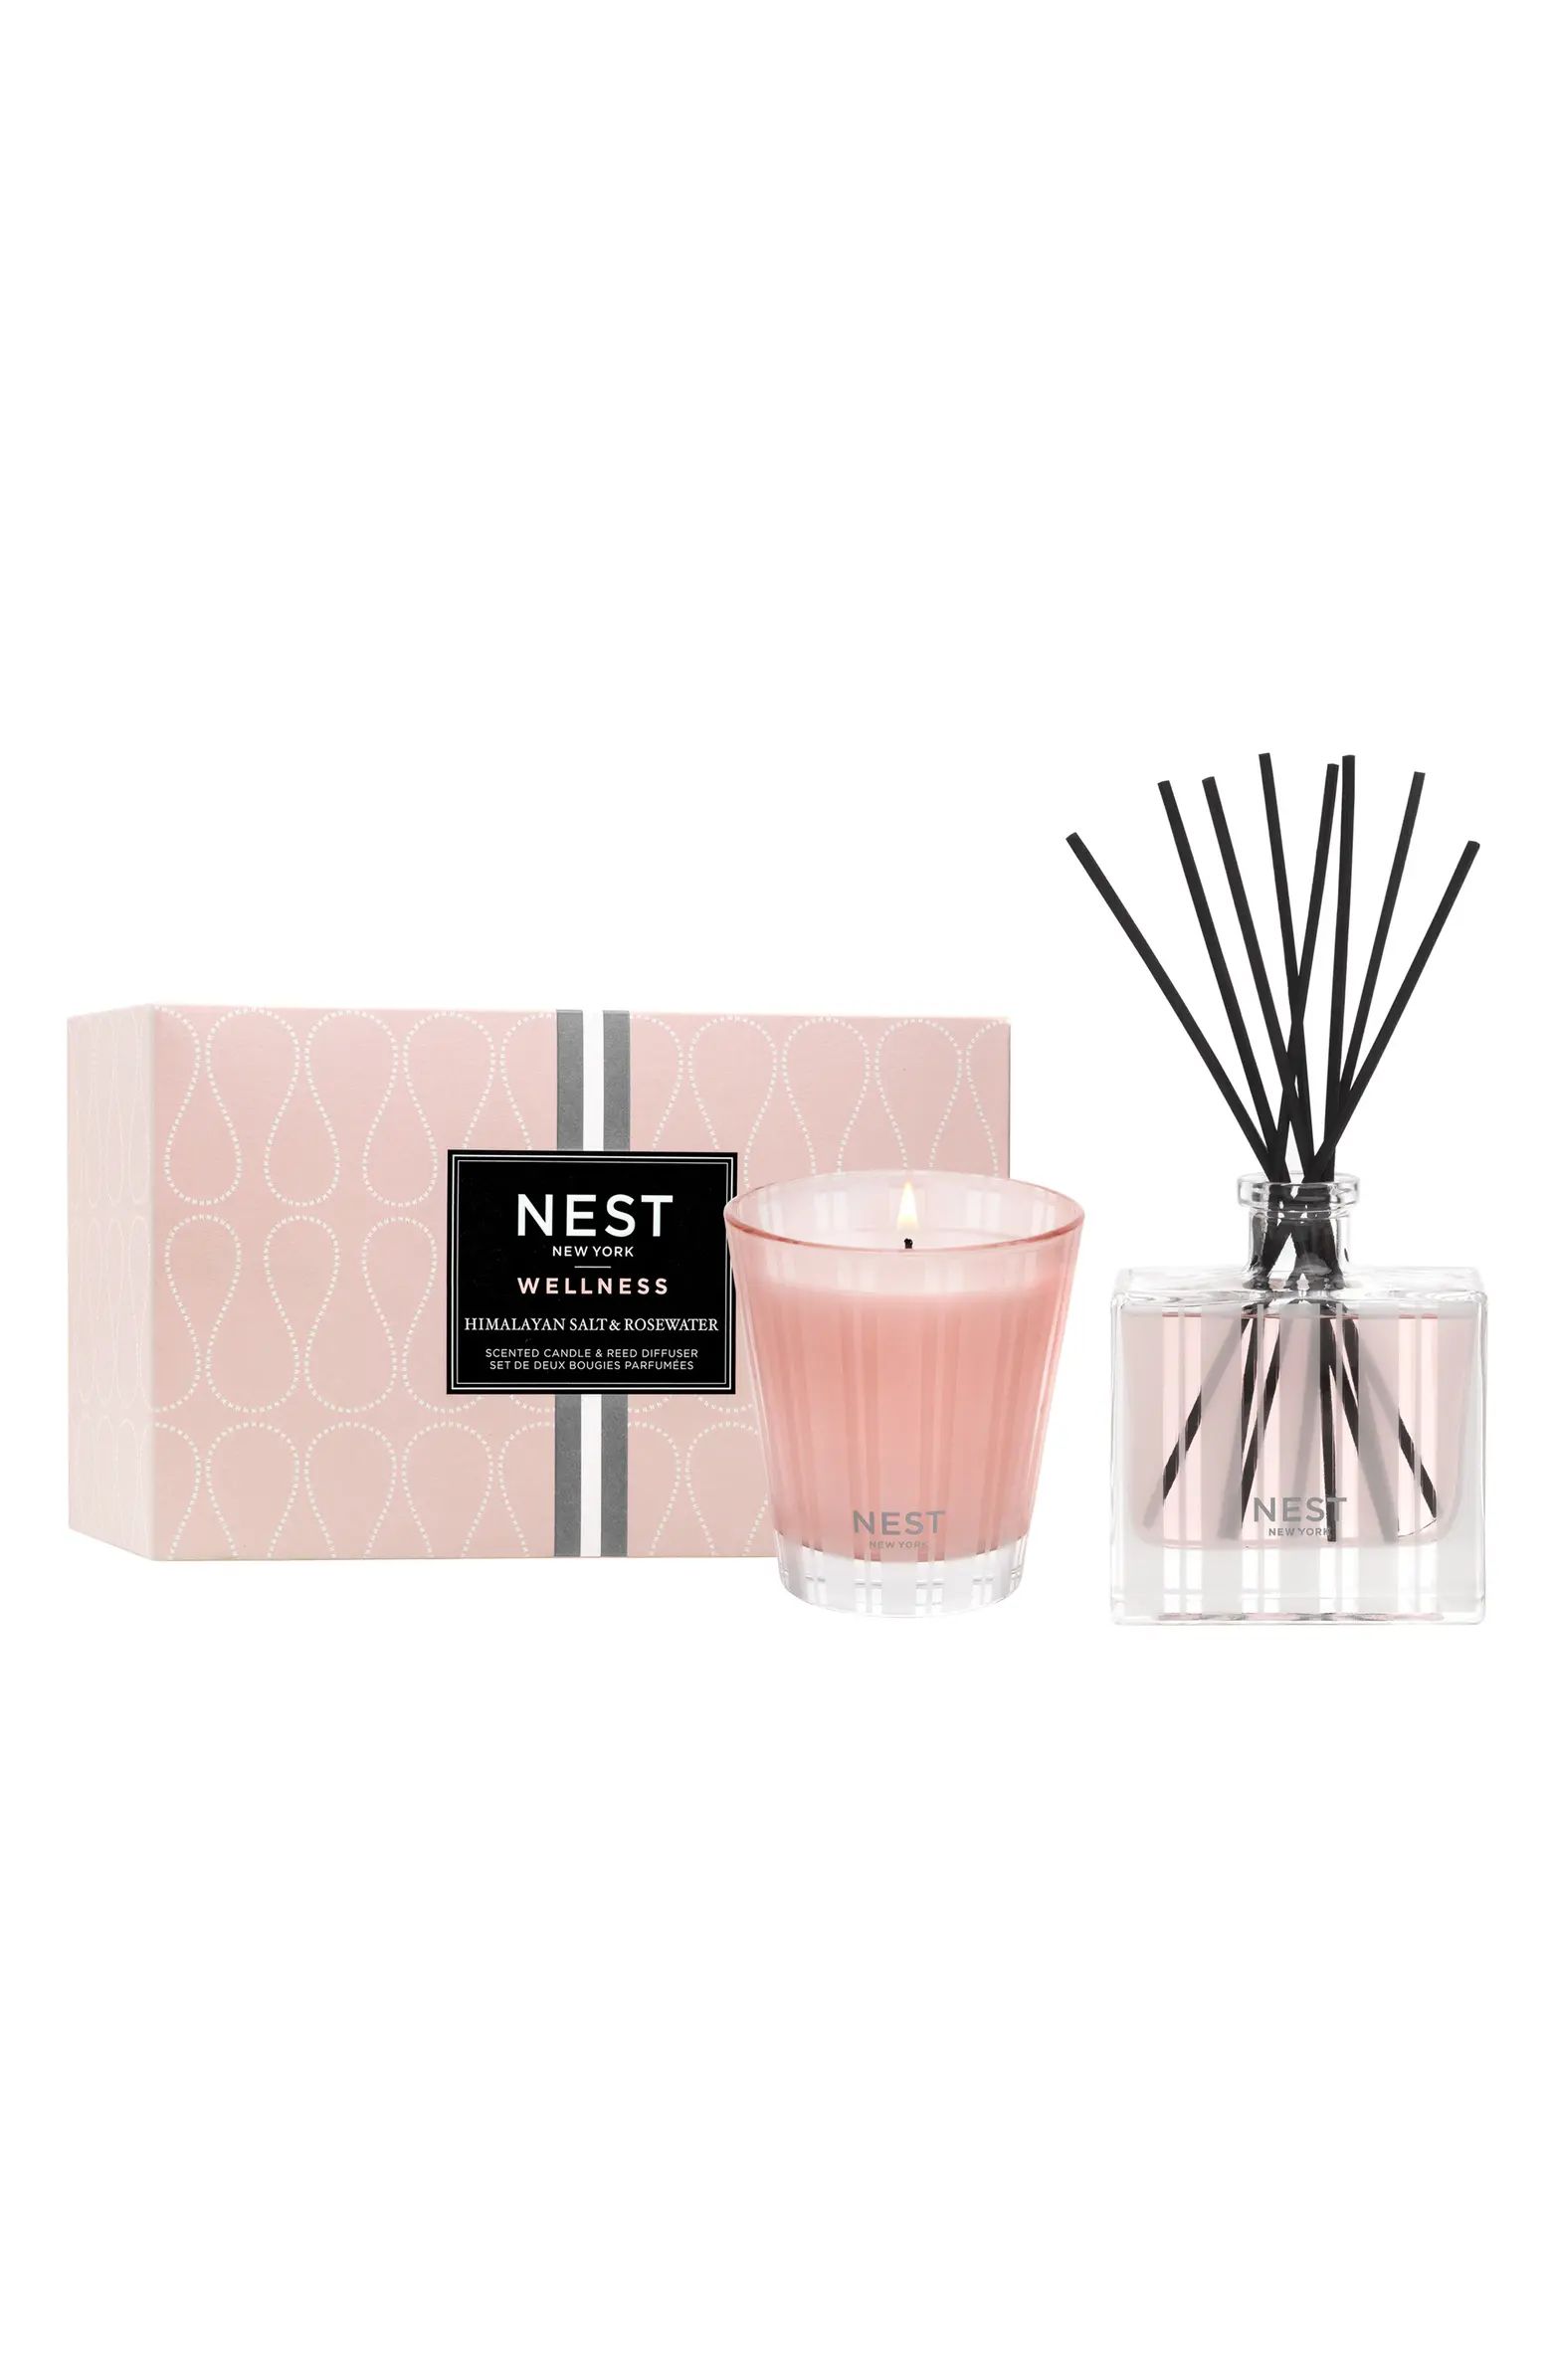 NEST New York Himalayan Salt & Rosewater Classic Candle & Reed Diffuser Set $110 Value | Nordstro... | Nordstrom